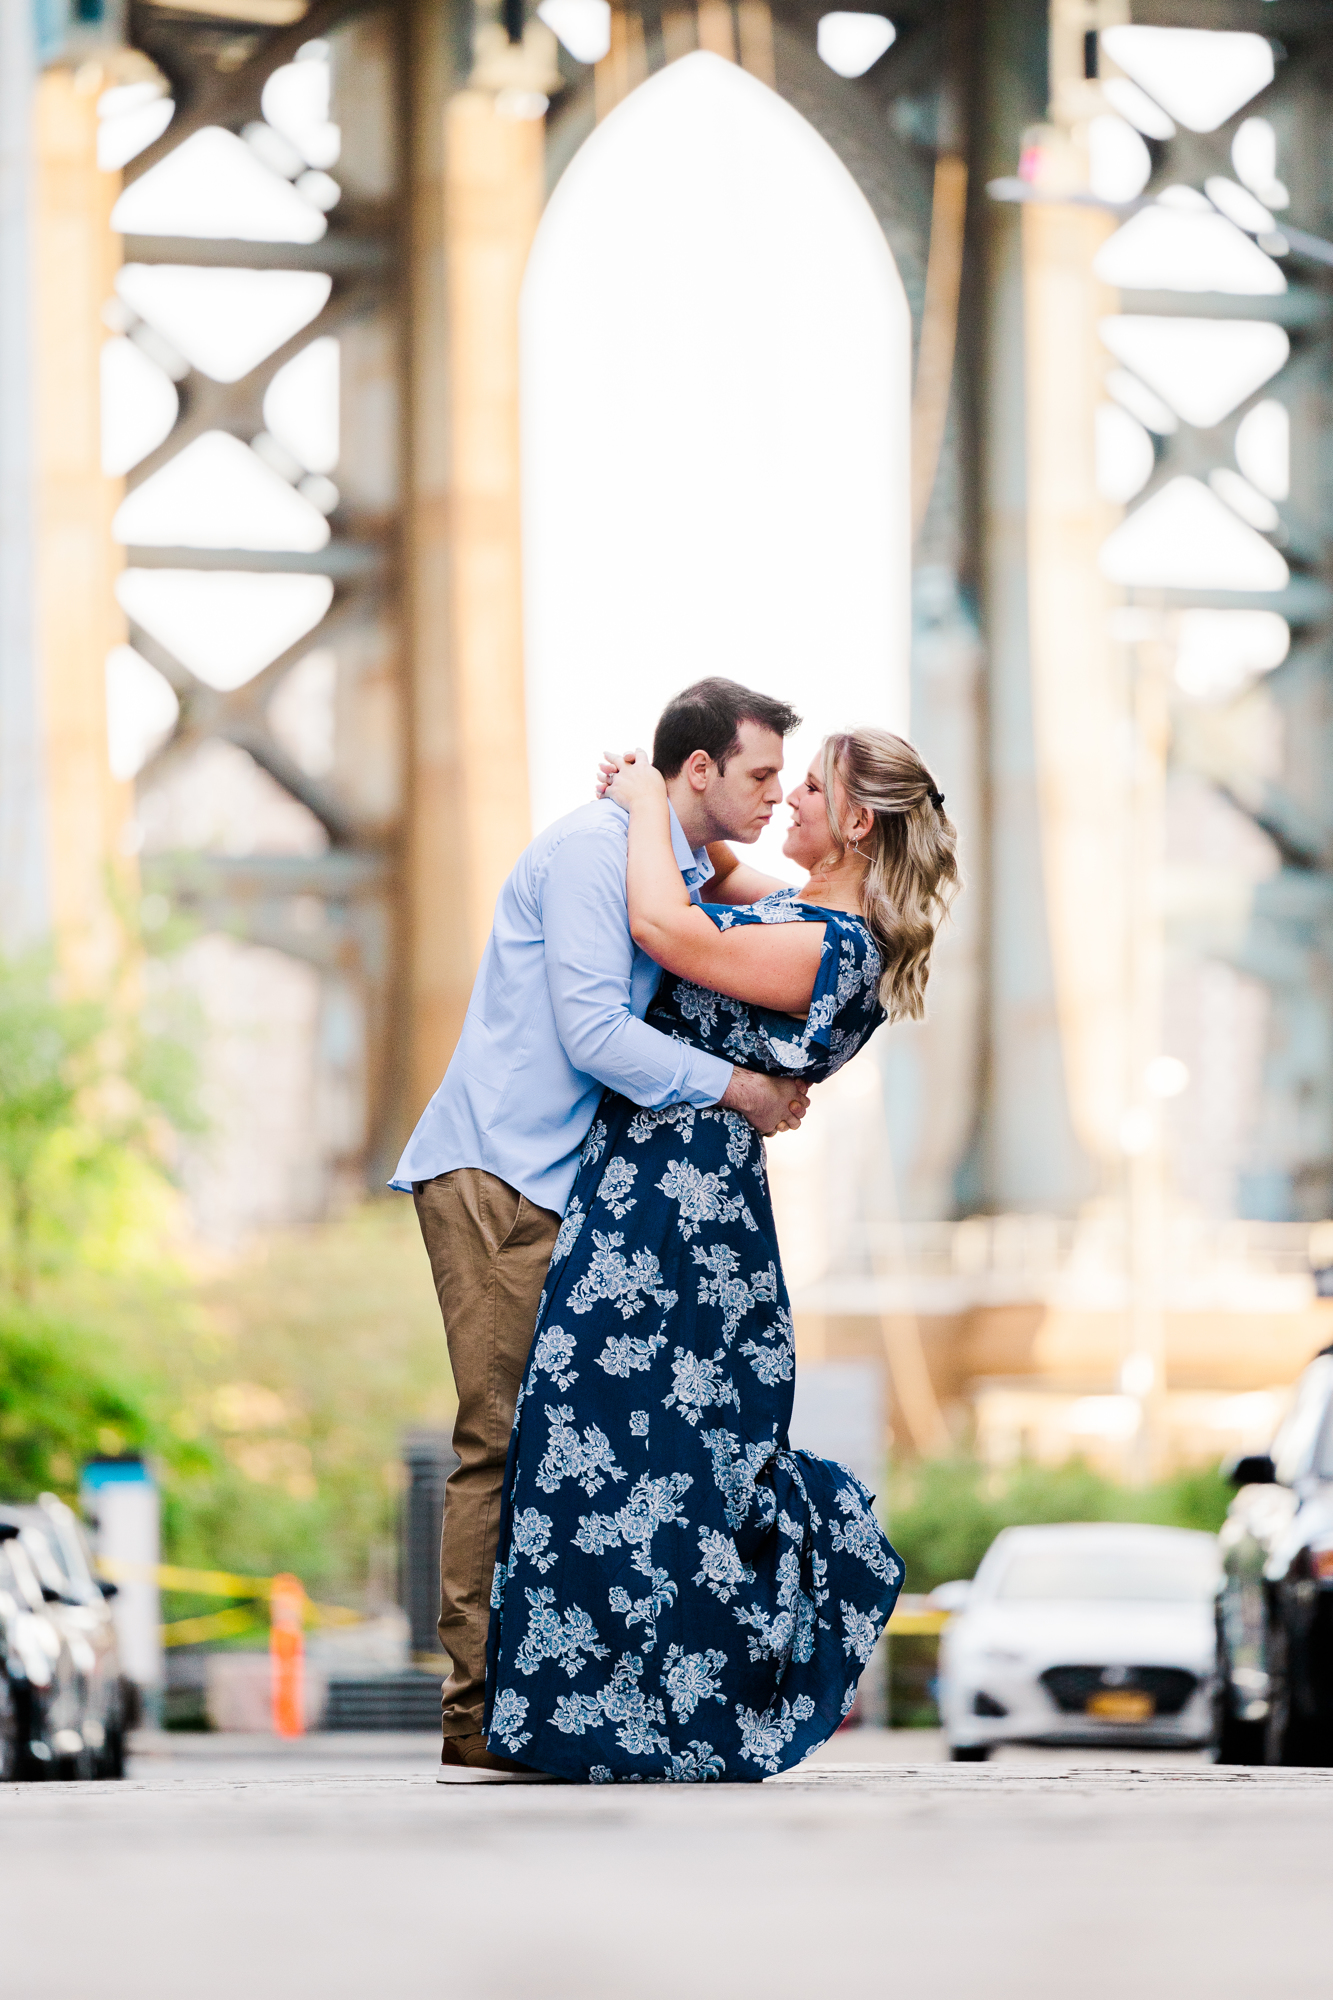 Charming Engagement Pictures in DUMBO